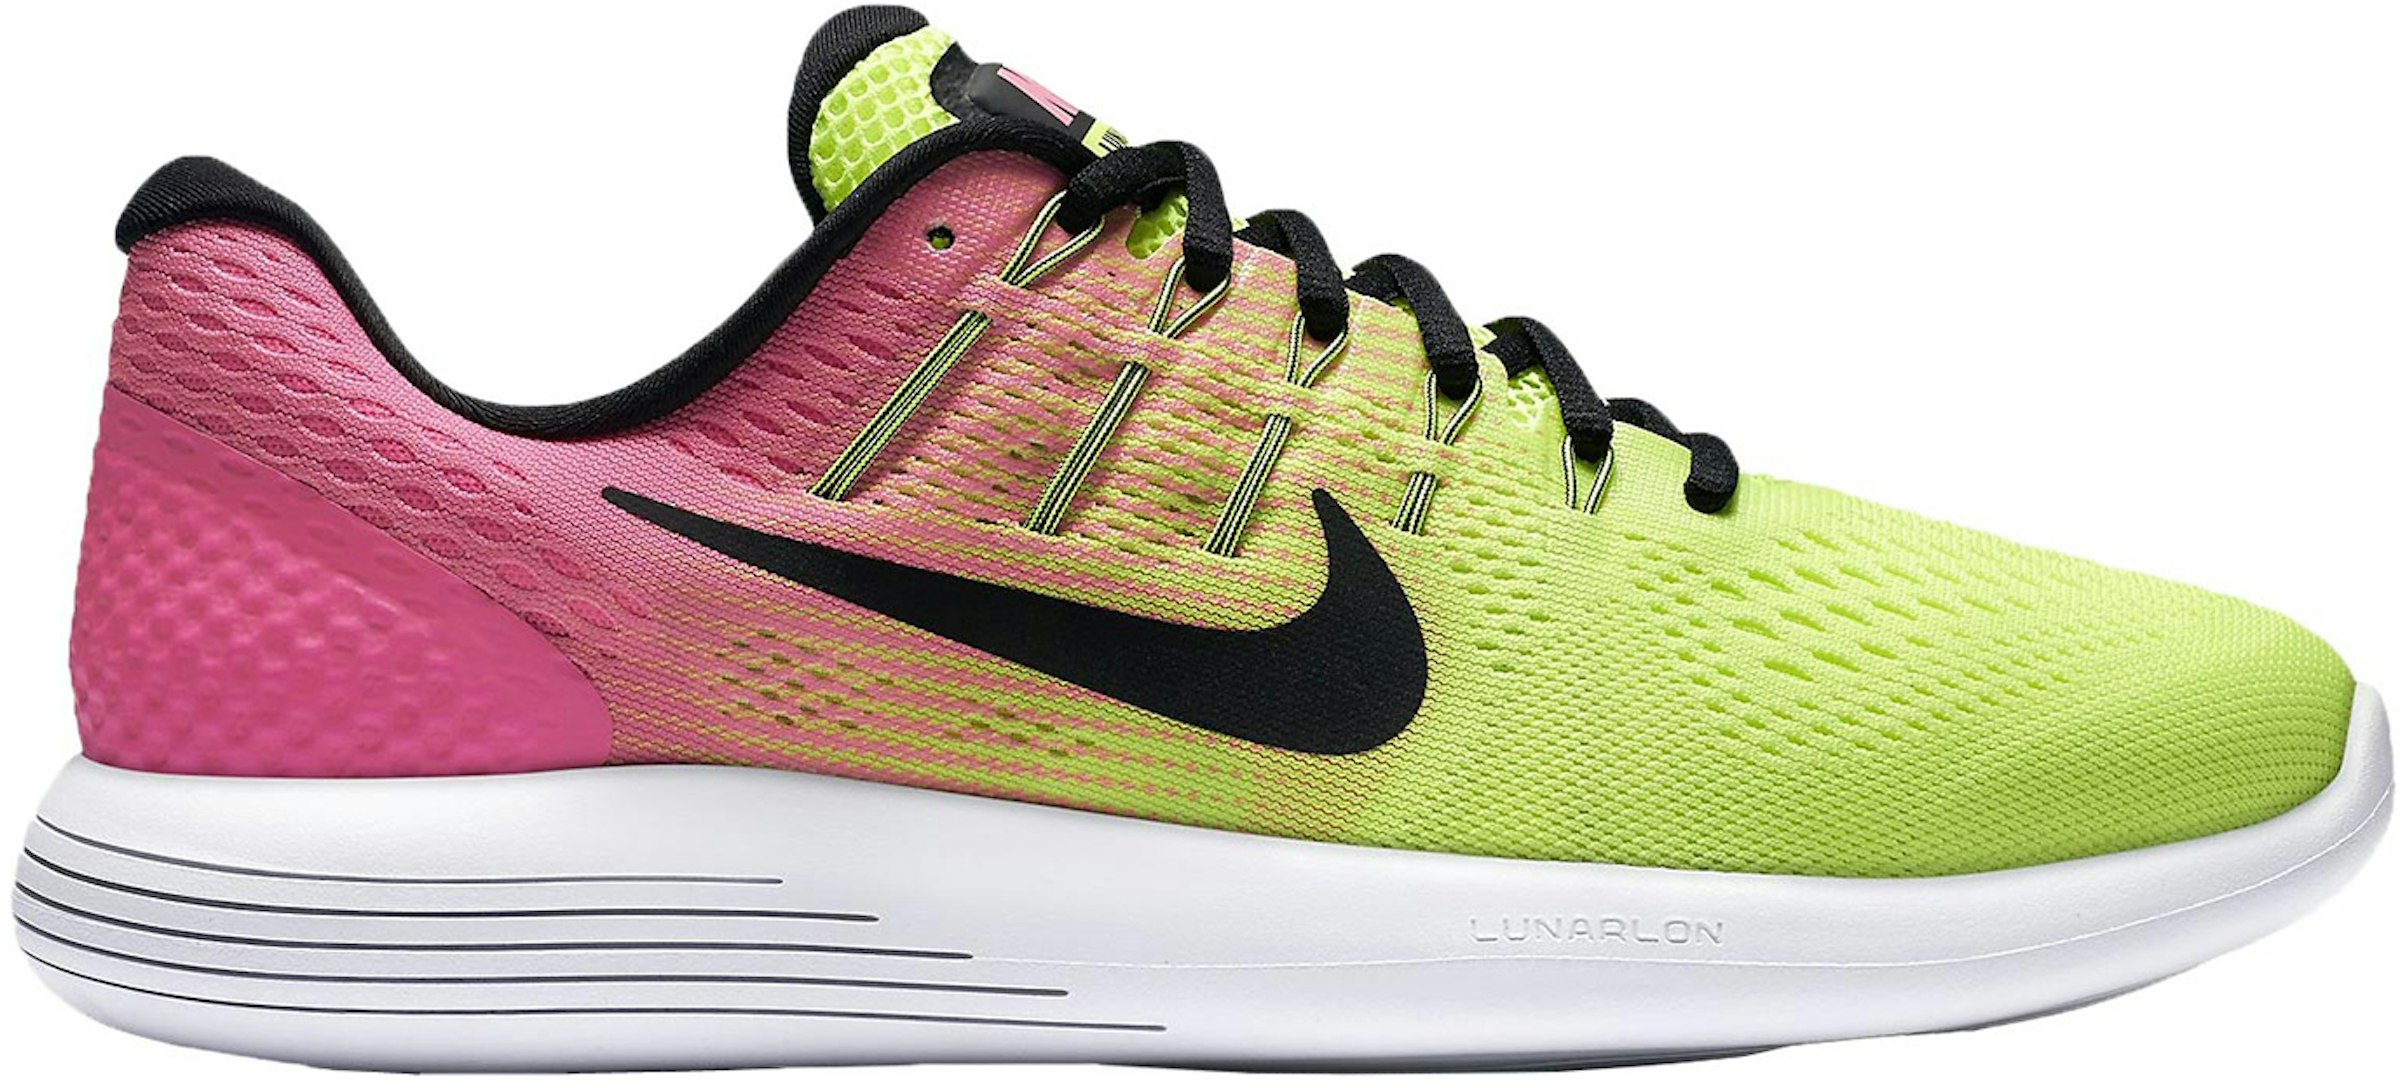 Nike Lunarglide 8 OC Unlimited Olympic Collection Hombre 844632-999 -